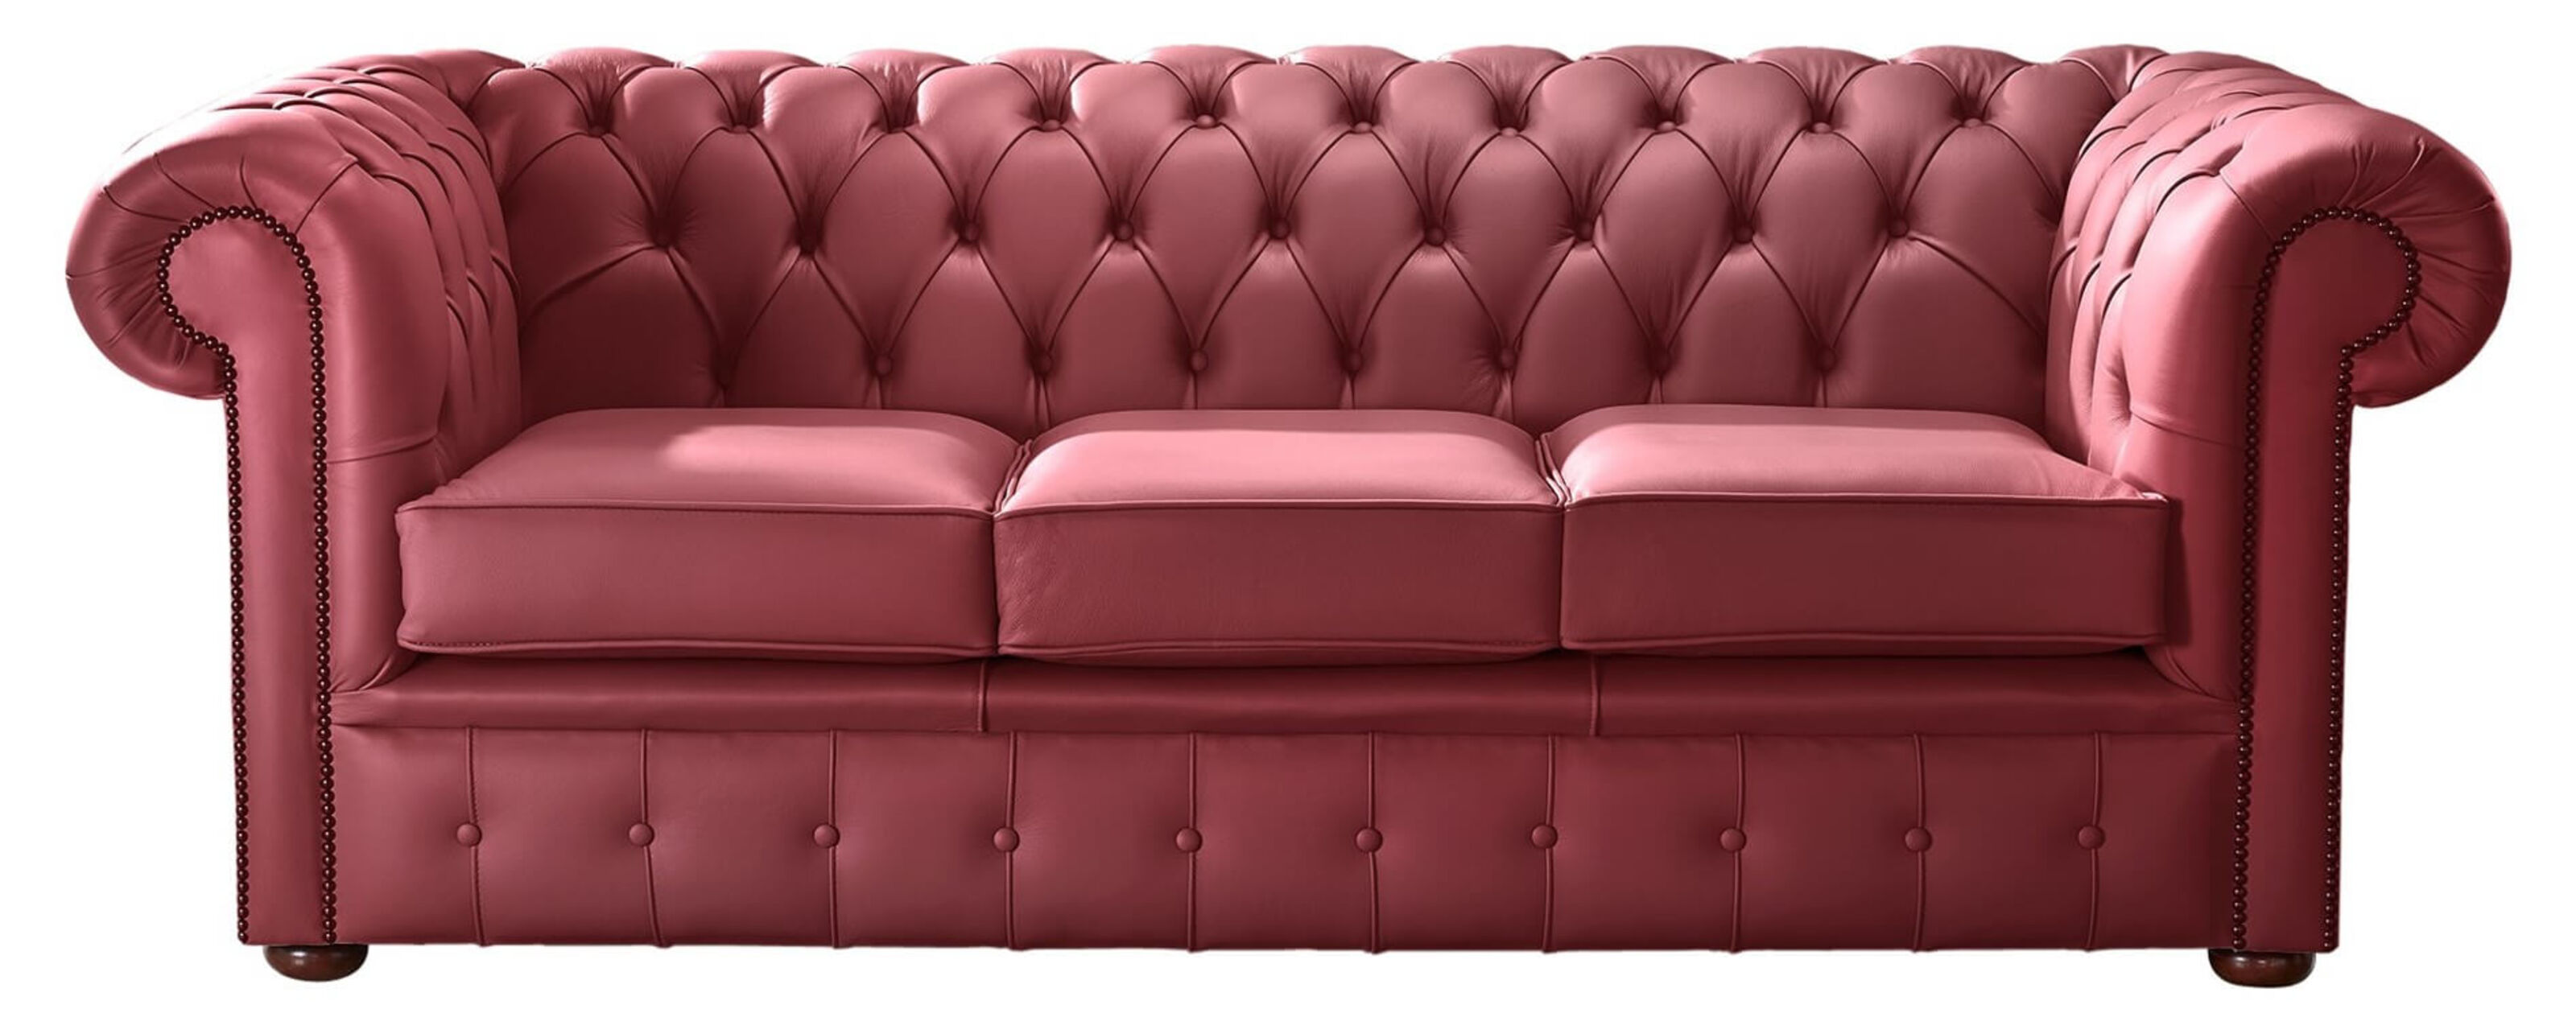 Choosing the Perfect Spot for Your Chesterfield Sofa  %Post Title